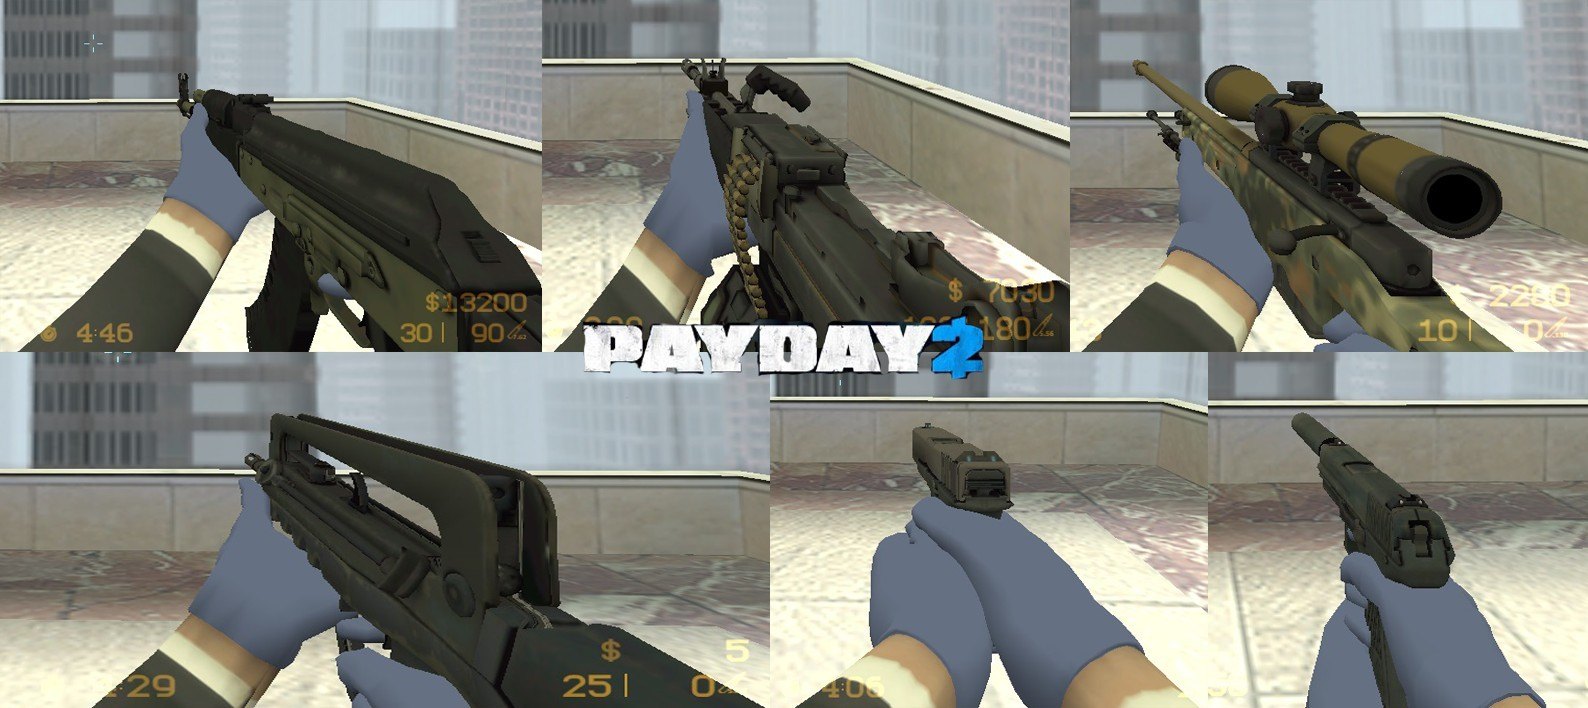 Payday 2 skins for weapons фото 31